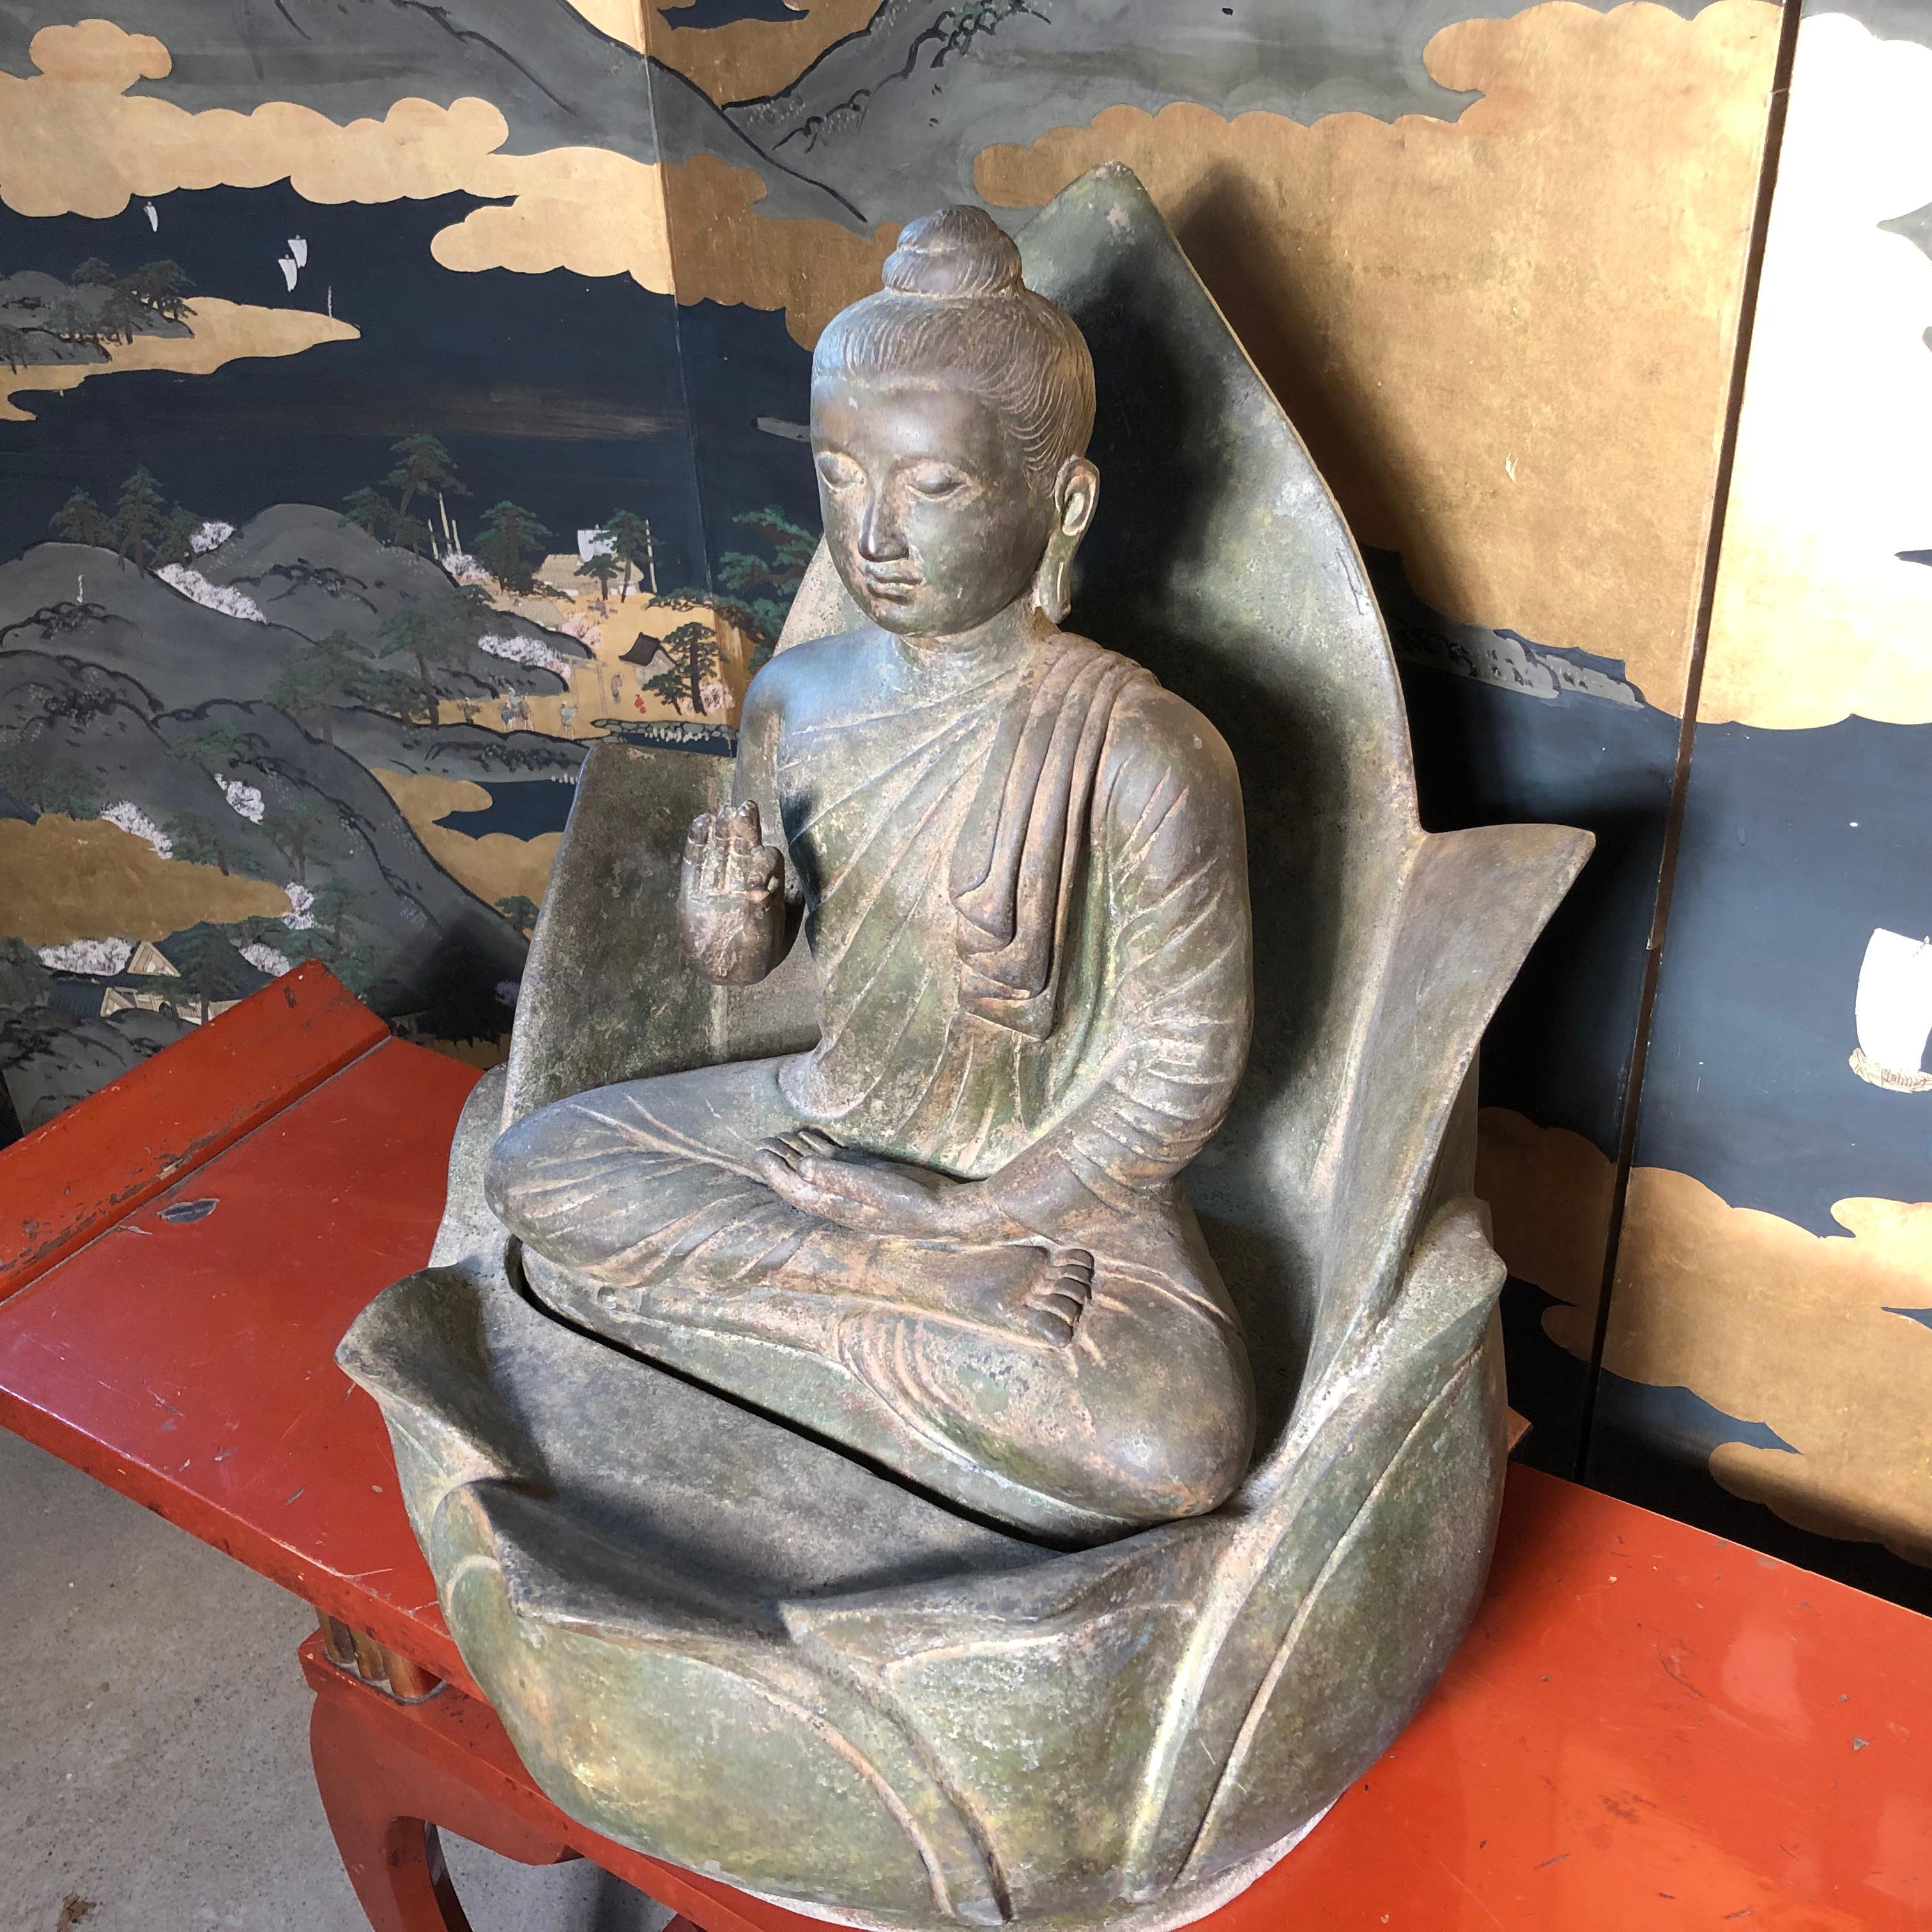 A Lovely face seated atop a budding lotus

Seated India Gandhara bronze Buddha, 19th century, Old UK Private collection

This beautiful Buddha sculpture will bring serenity and timeless style to your home, office, sacred space, or garden. 

The